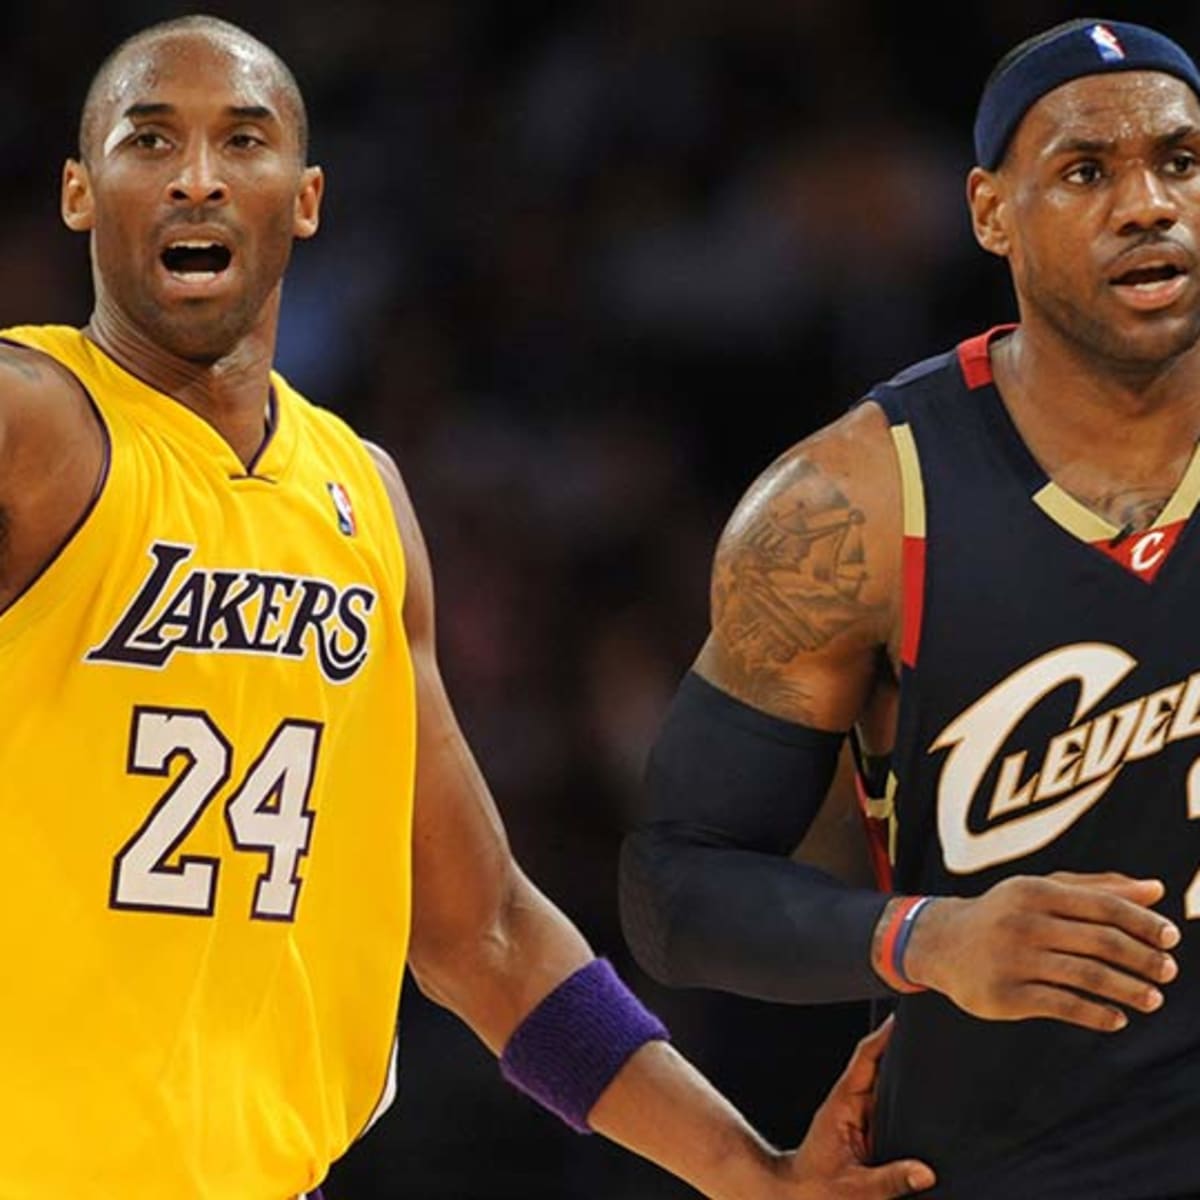 The Real Meaning Behind Every Single Tattoo of Lakers Legend Kobe